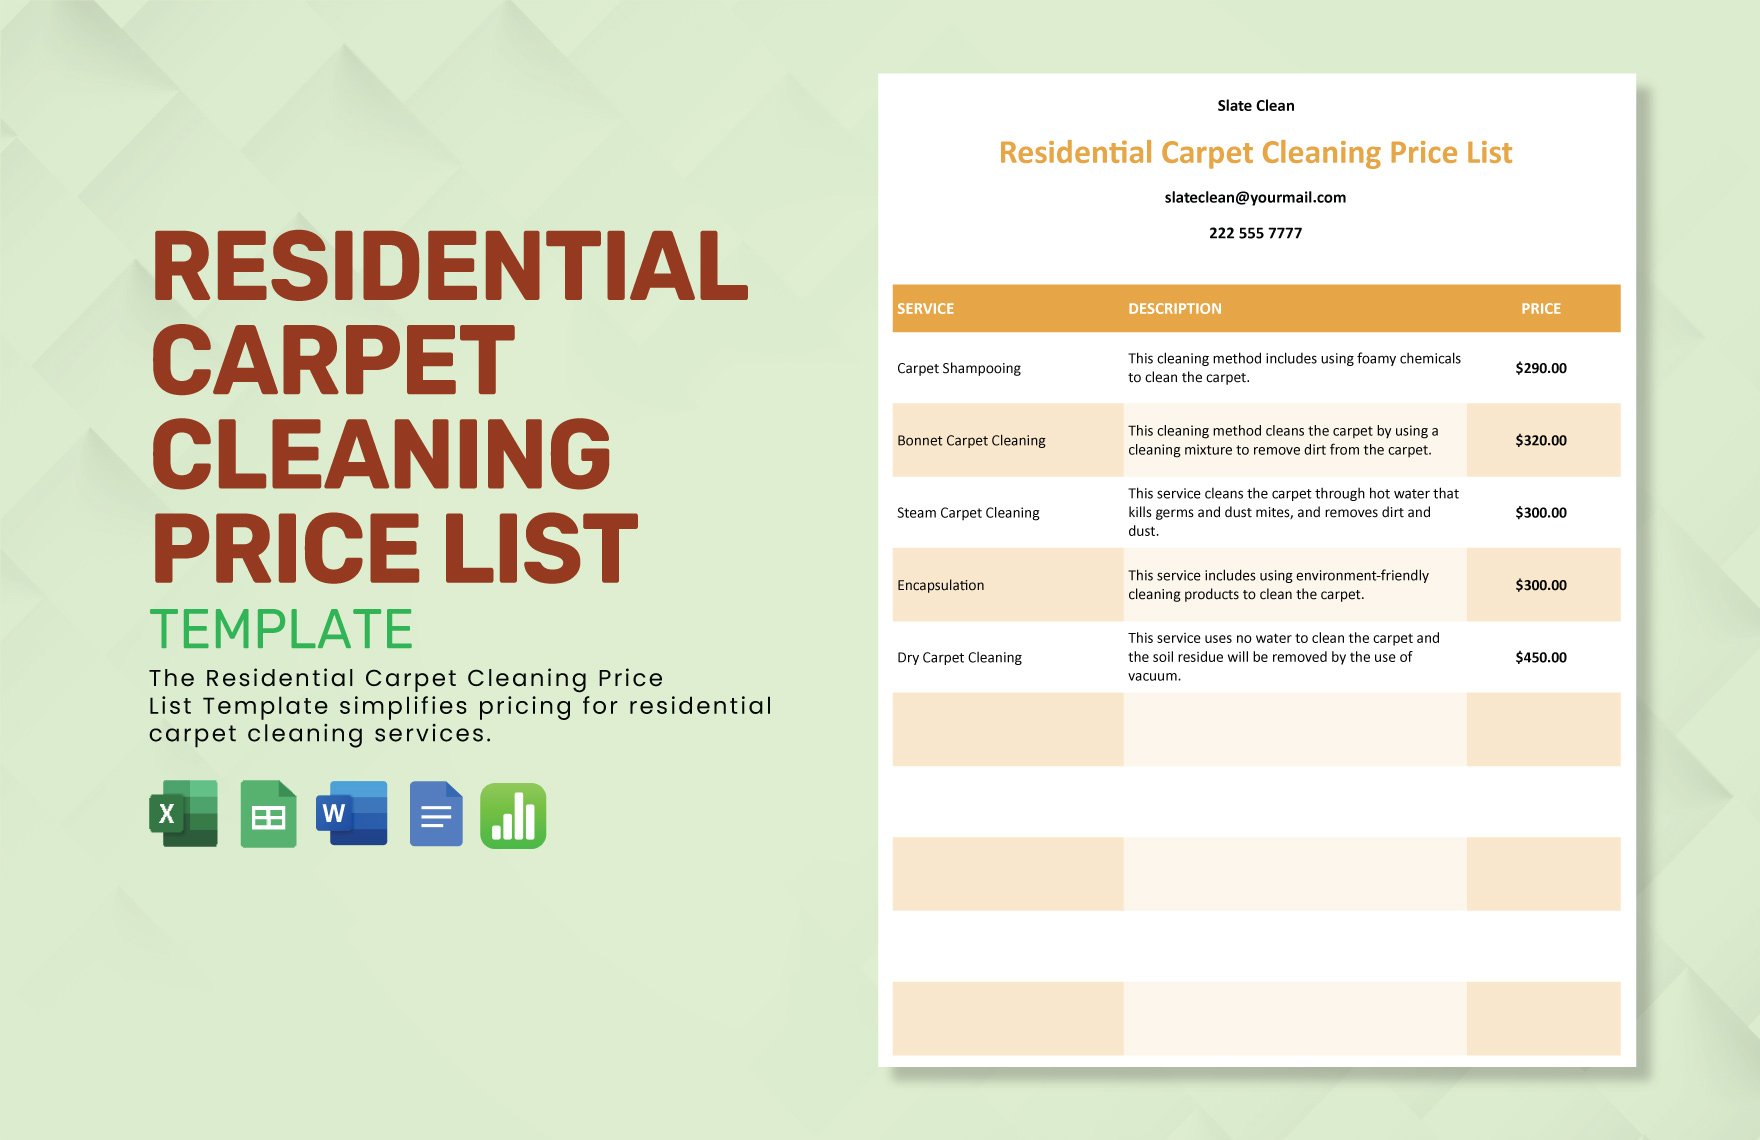 Residential Carpet Cleaning Price List Template in Word, Google Docs, Excel, Google Sheets, Apple Numbers